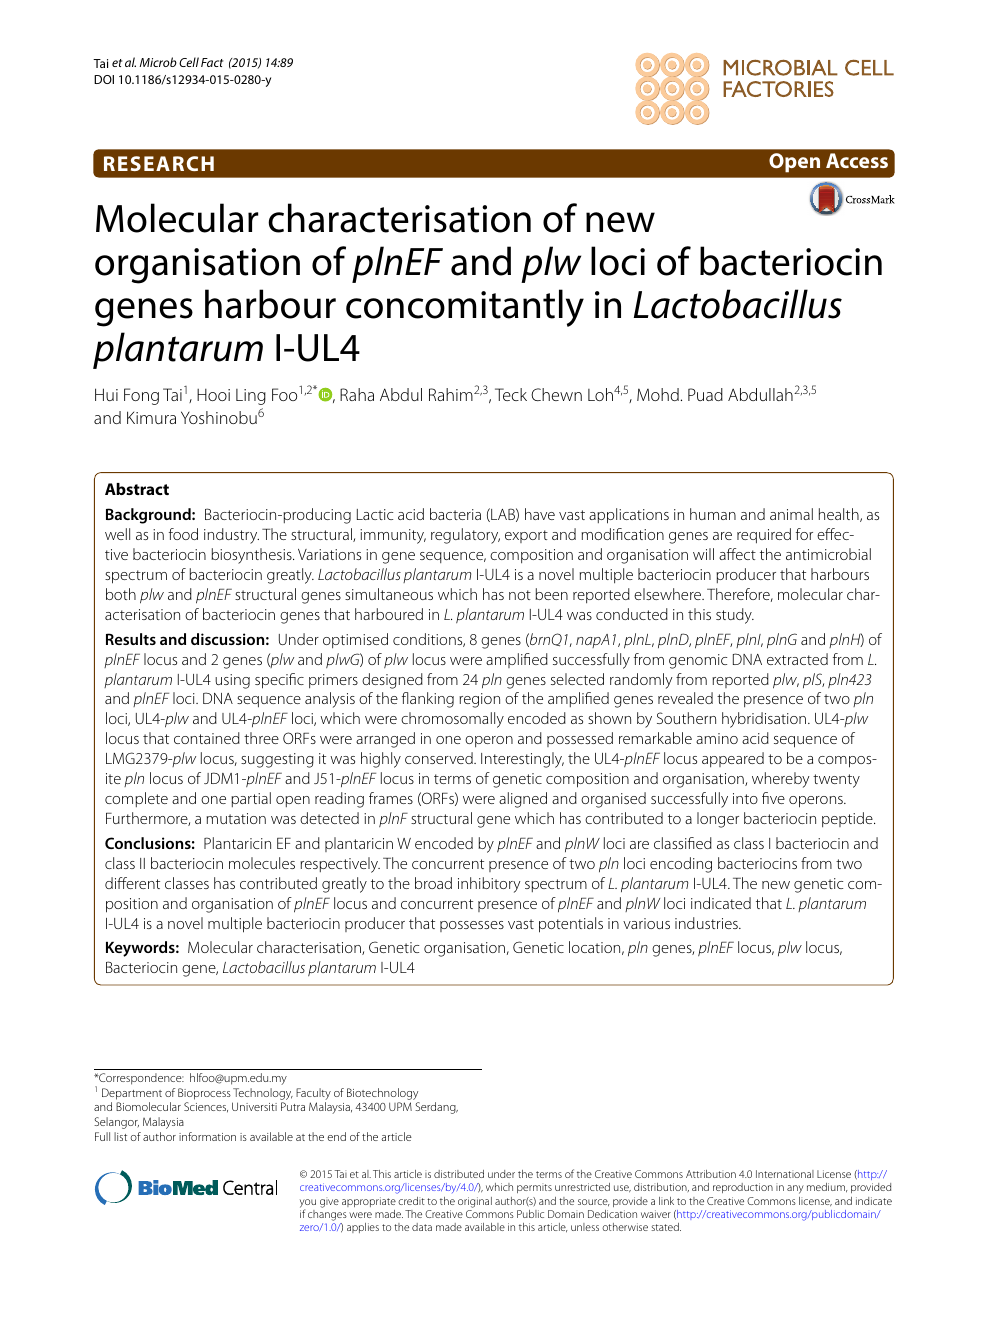 Molecular Characterisation Of New Organisation Of Plnef And Plw Loci Of Bacteriocin Genes Harbour Concomitantly In Lactobacillus Plantarum I Ul4 Topic Of Research Paper In Veterinary Science Download Scholarly Article Pdf And